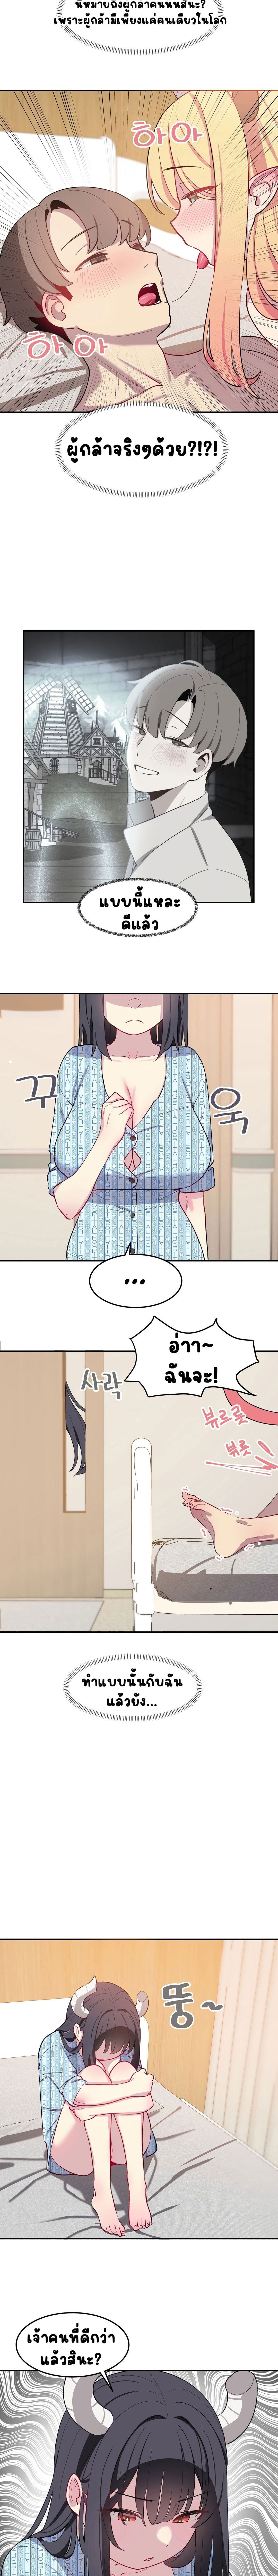 Hospitalized Life in Another World ตอนที่ 2 ภาพ 10